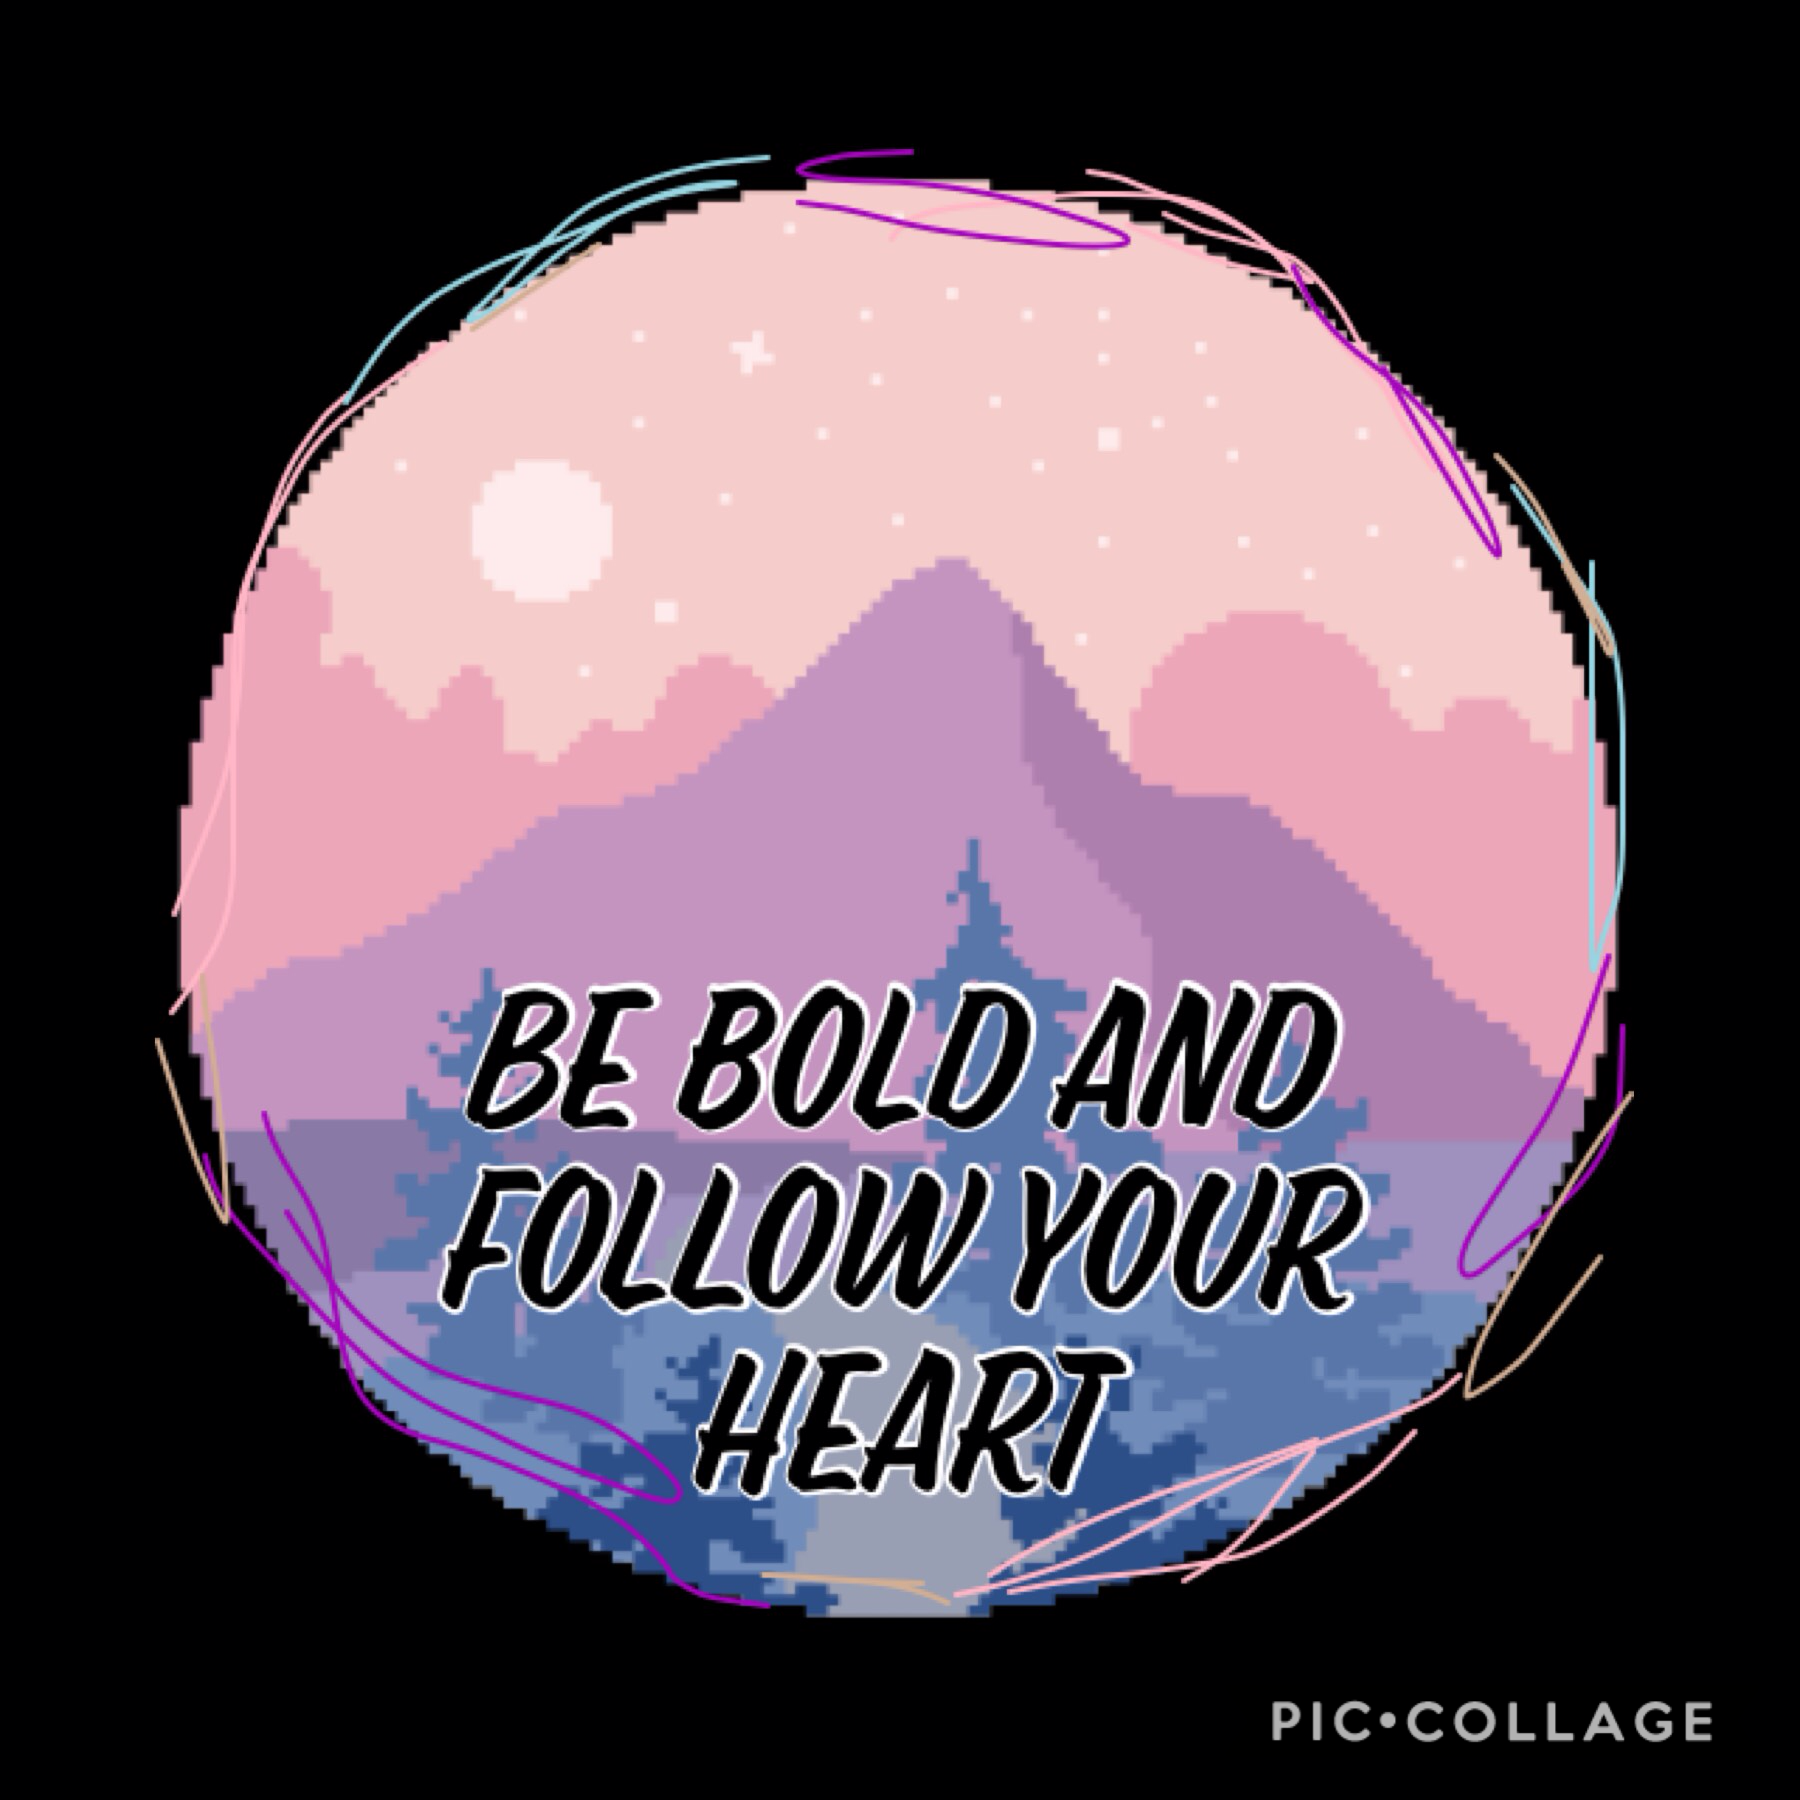 Be bold and follow your heart!⭐️